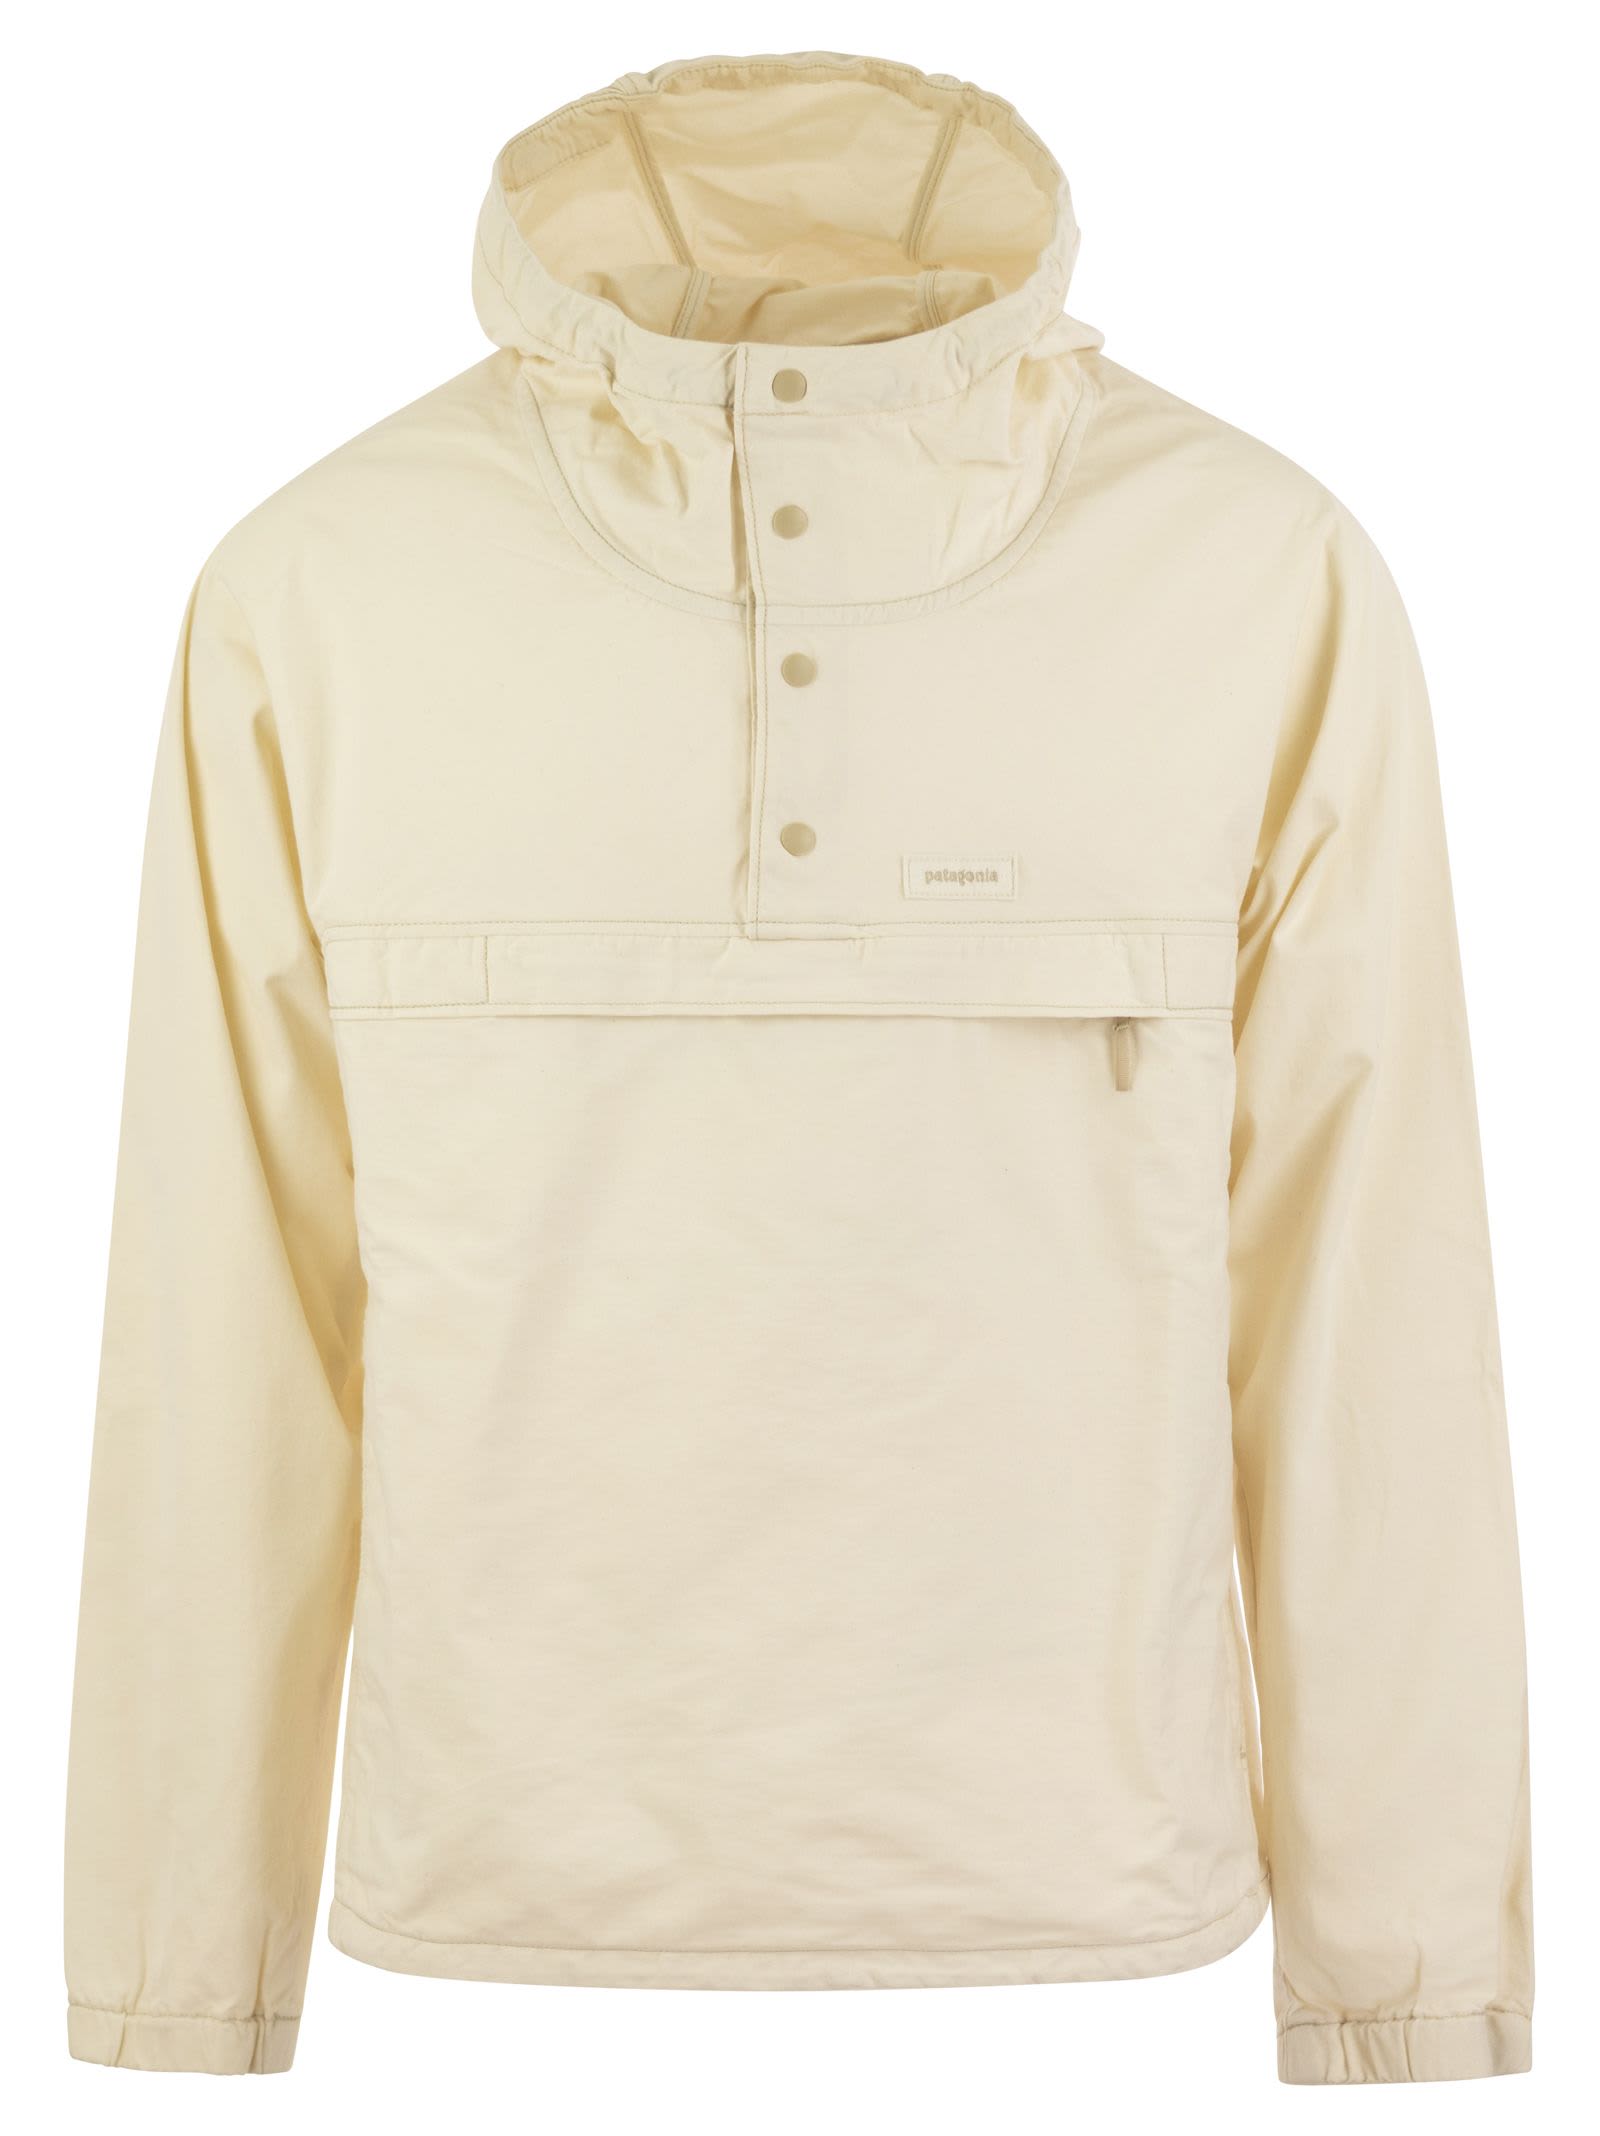 Funhoggers Pullover Jacket